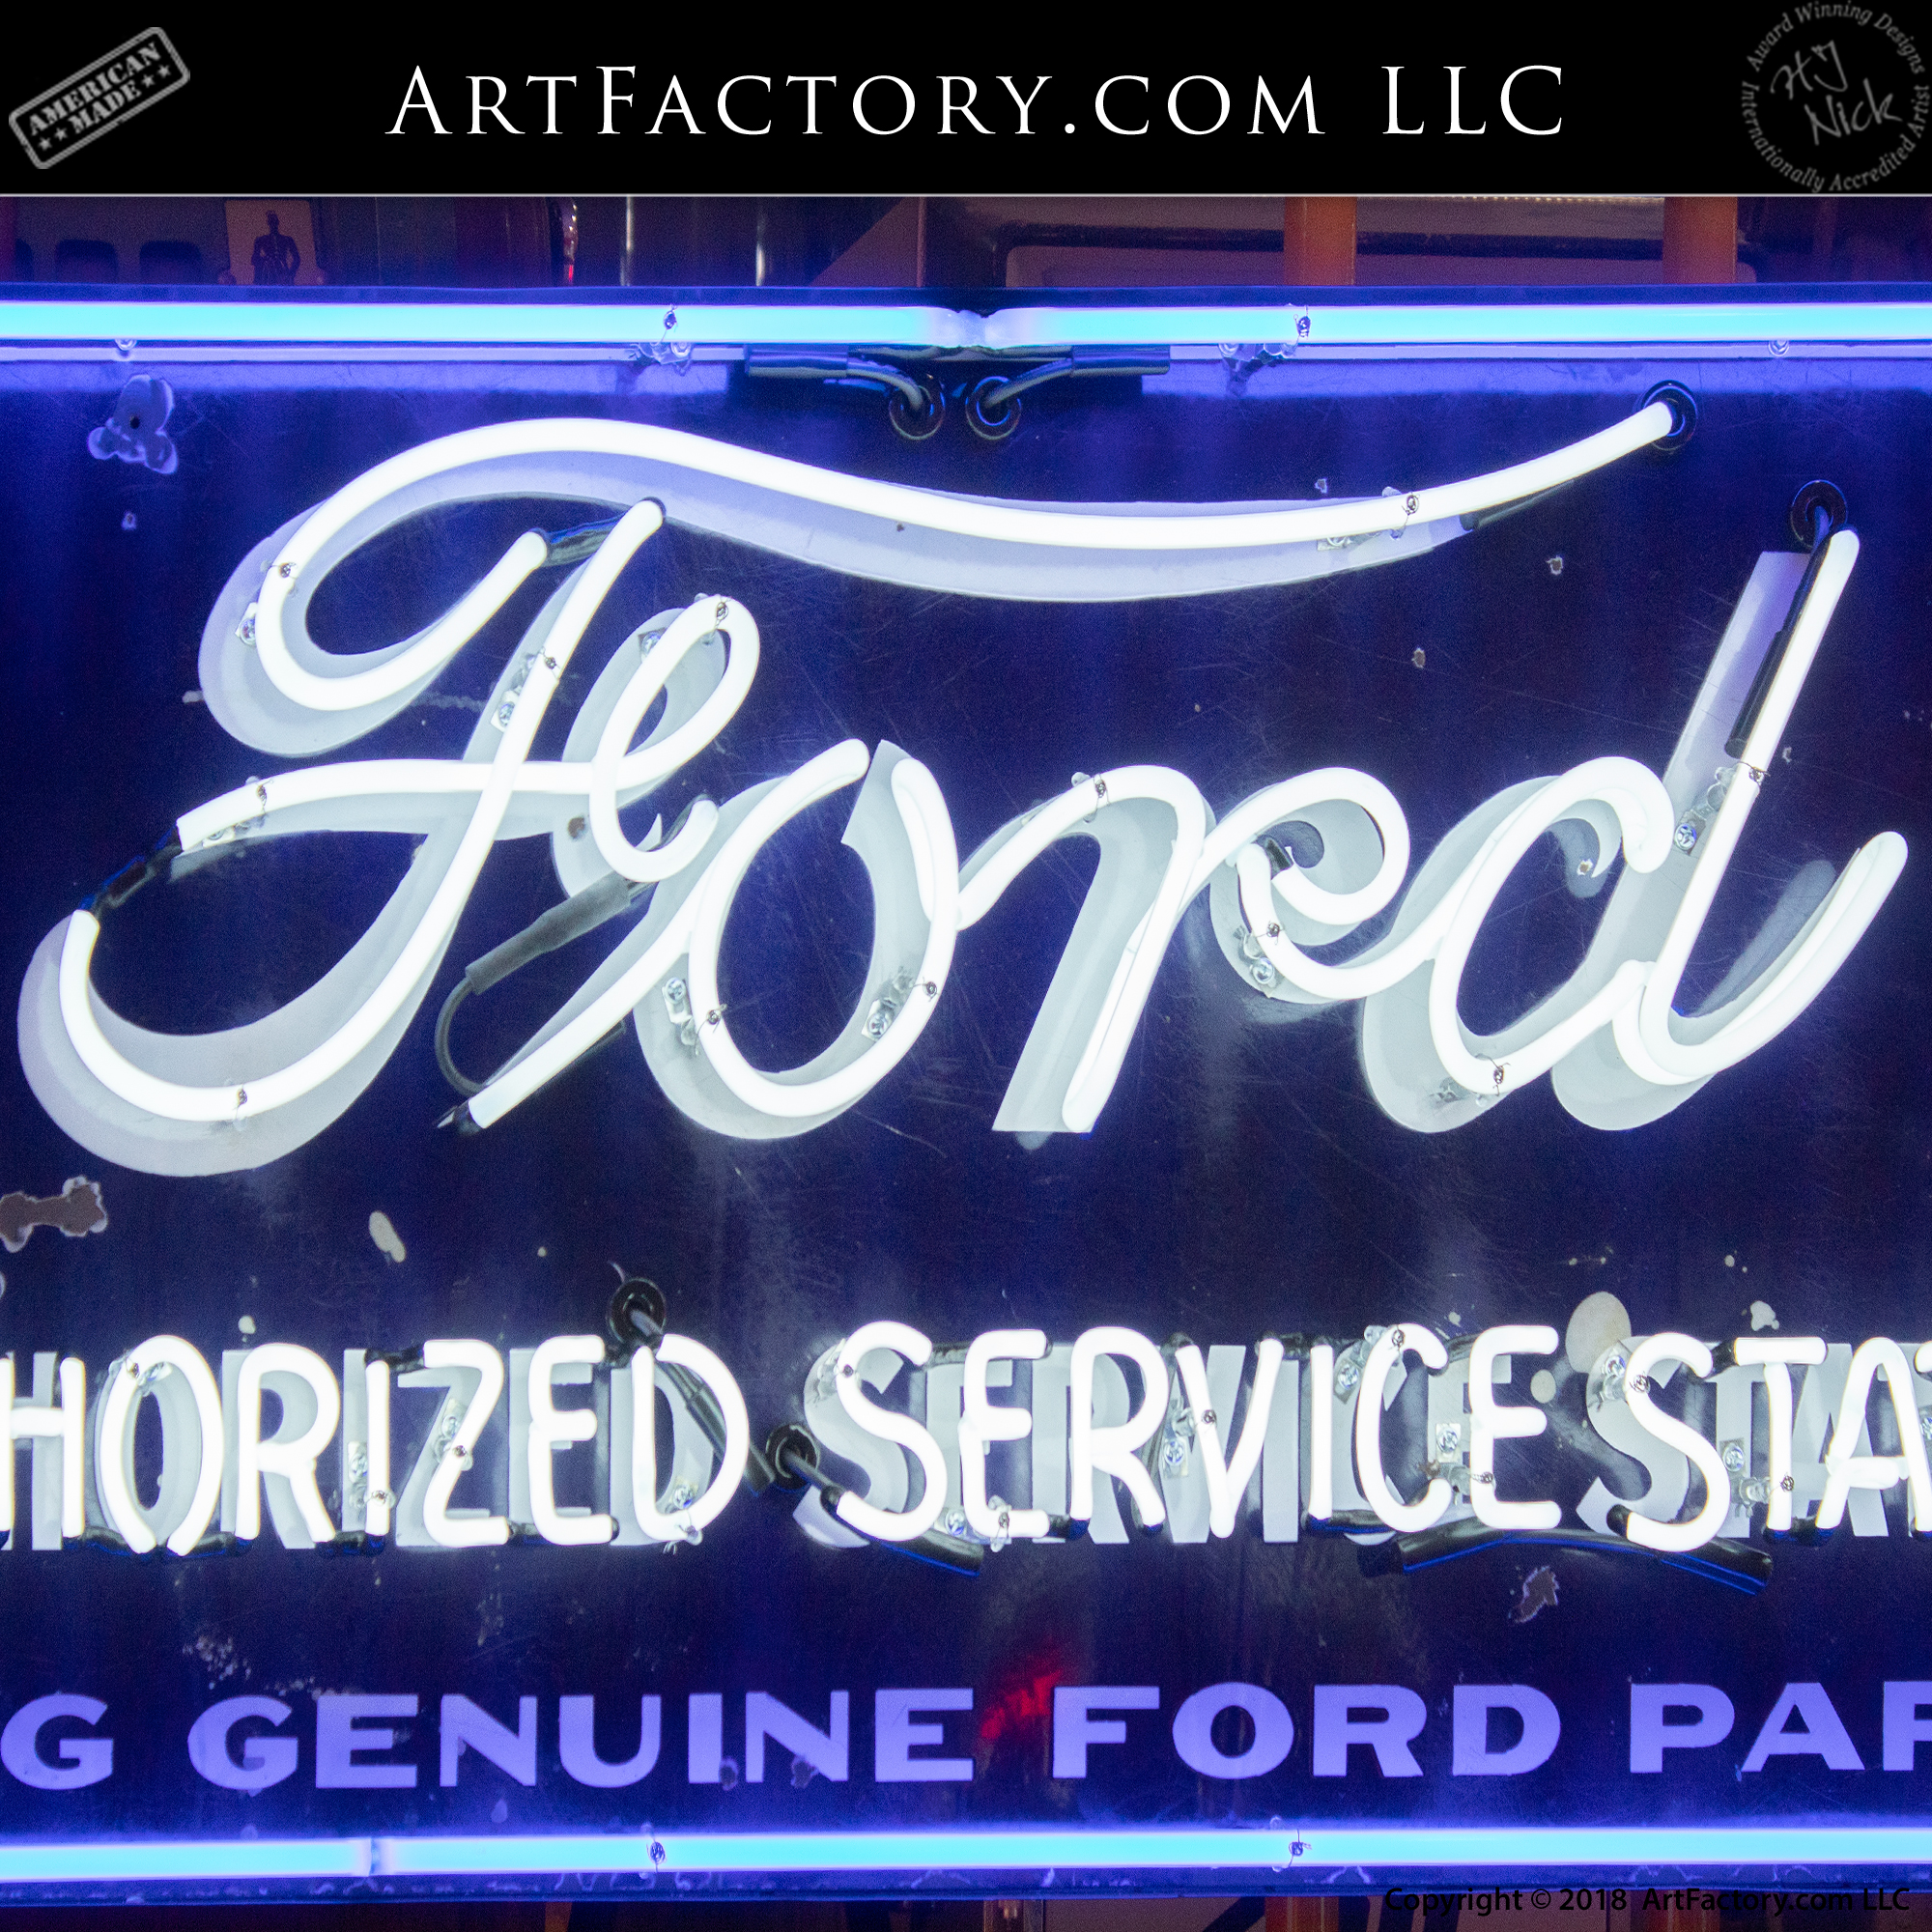 Ford-Authorized-Service-Station-Rectangle-3